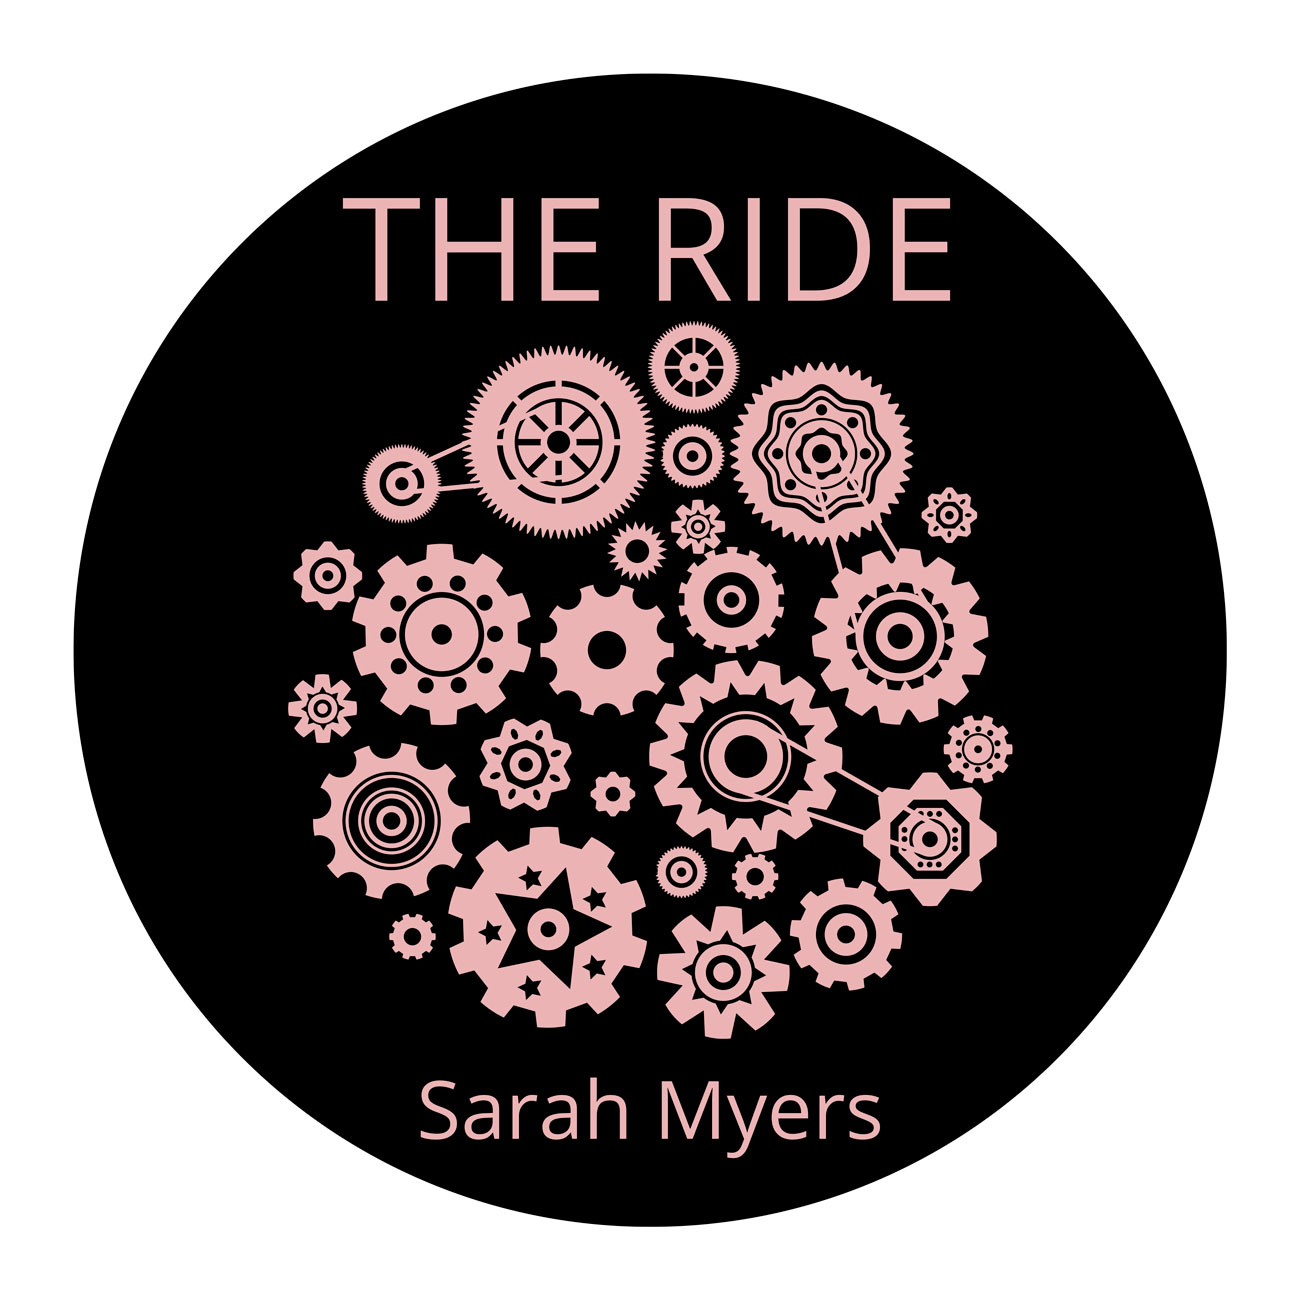 THE RIDE by Sarah Myers